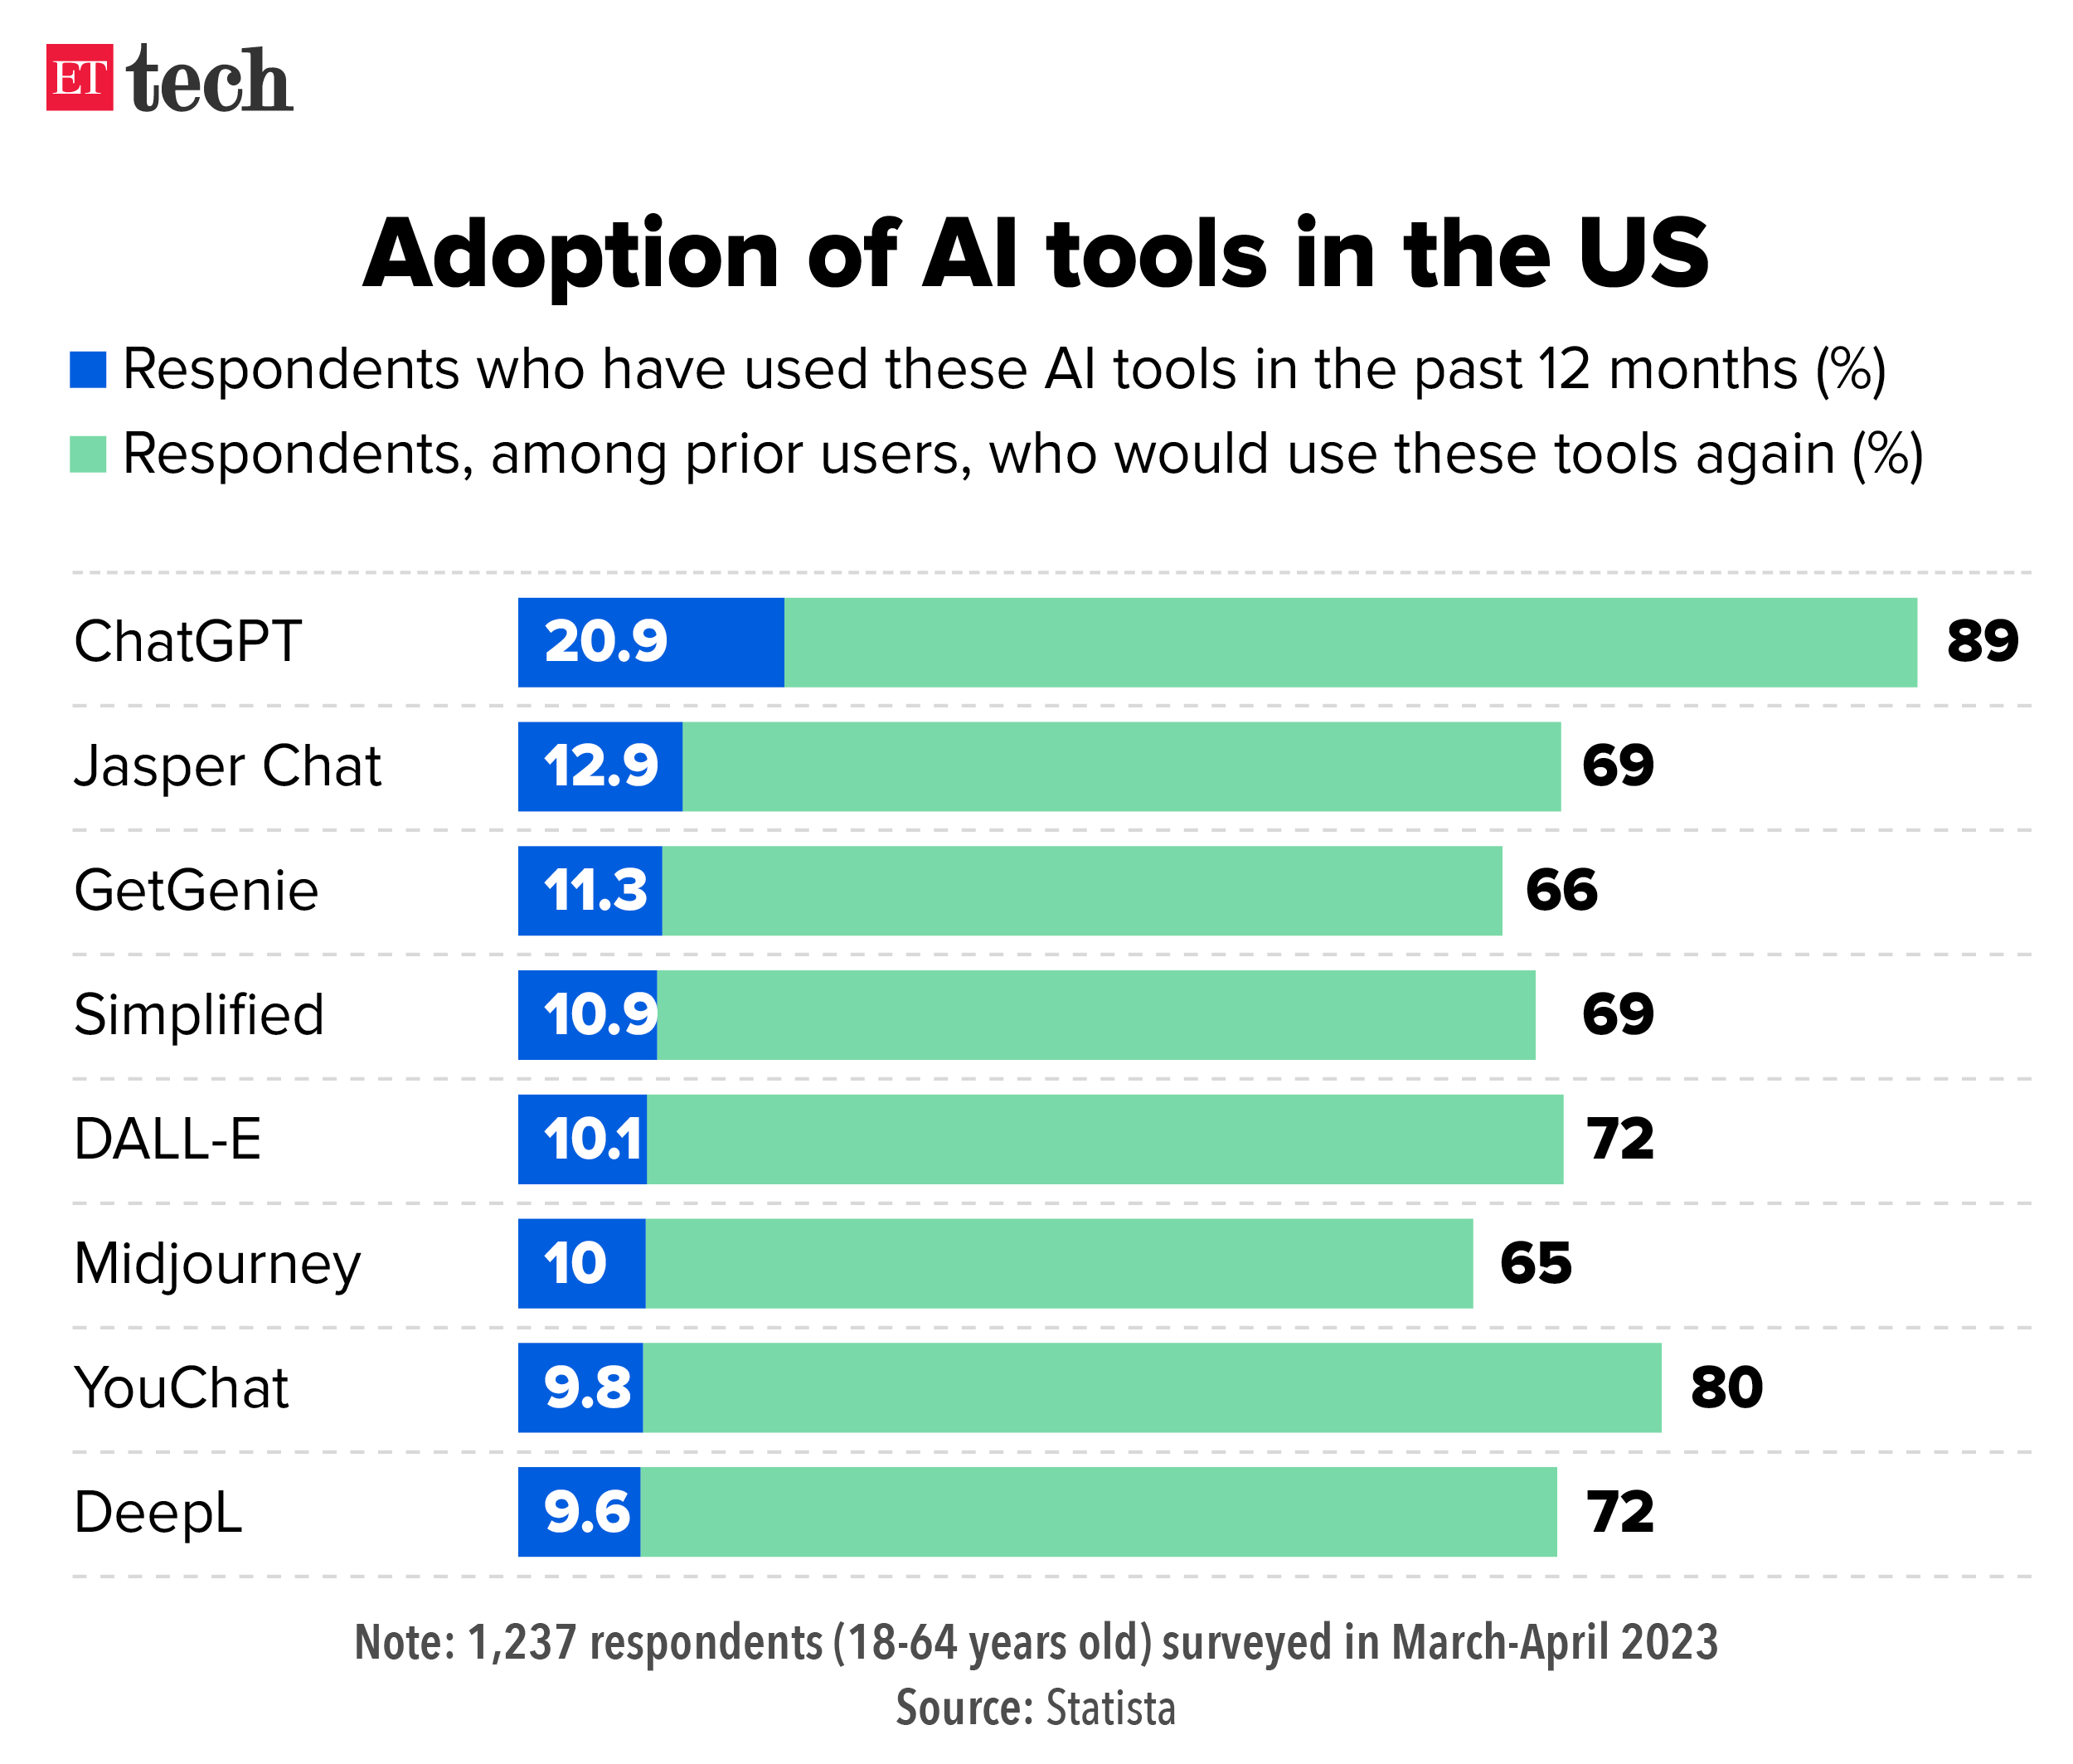 Adoption of AI tools in the US